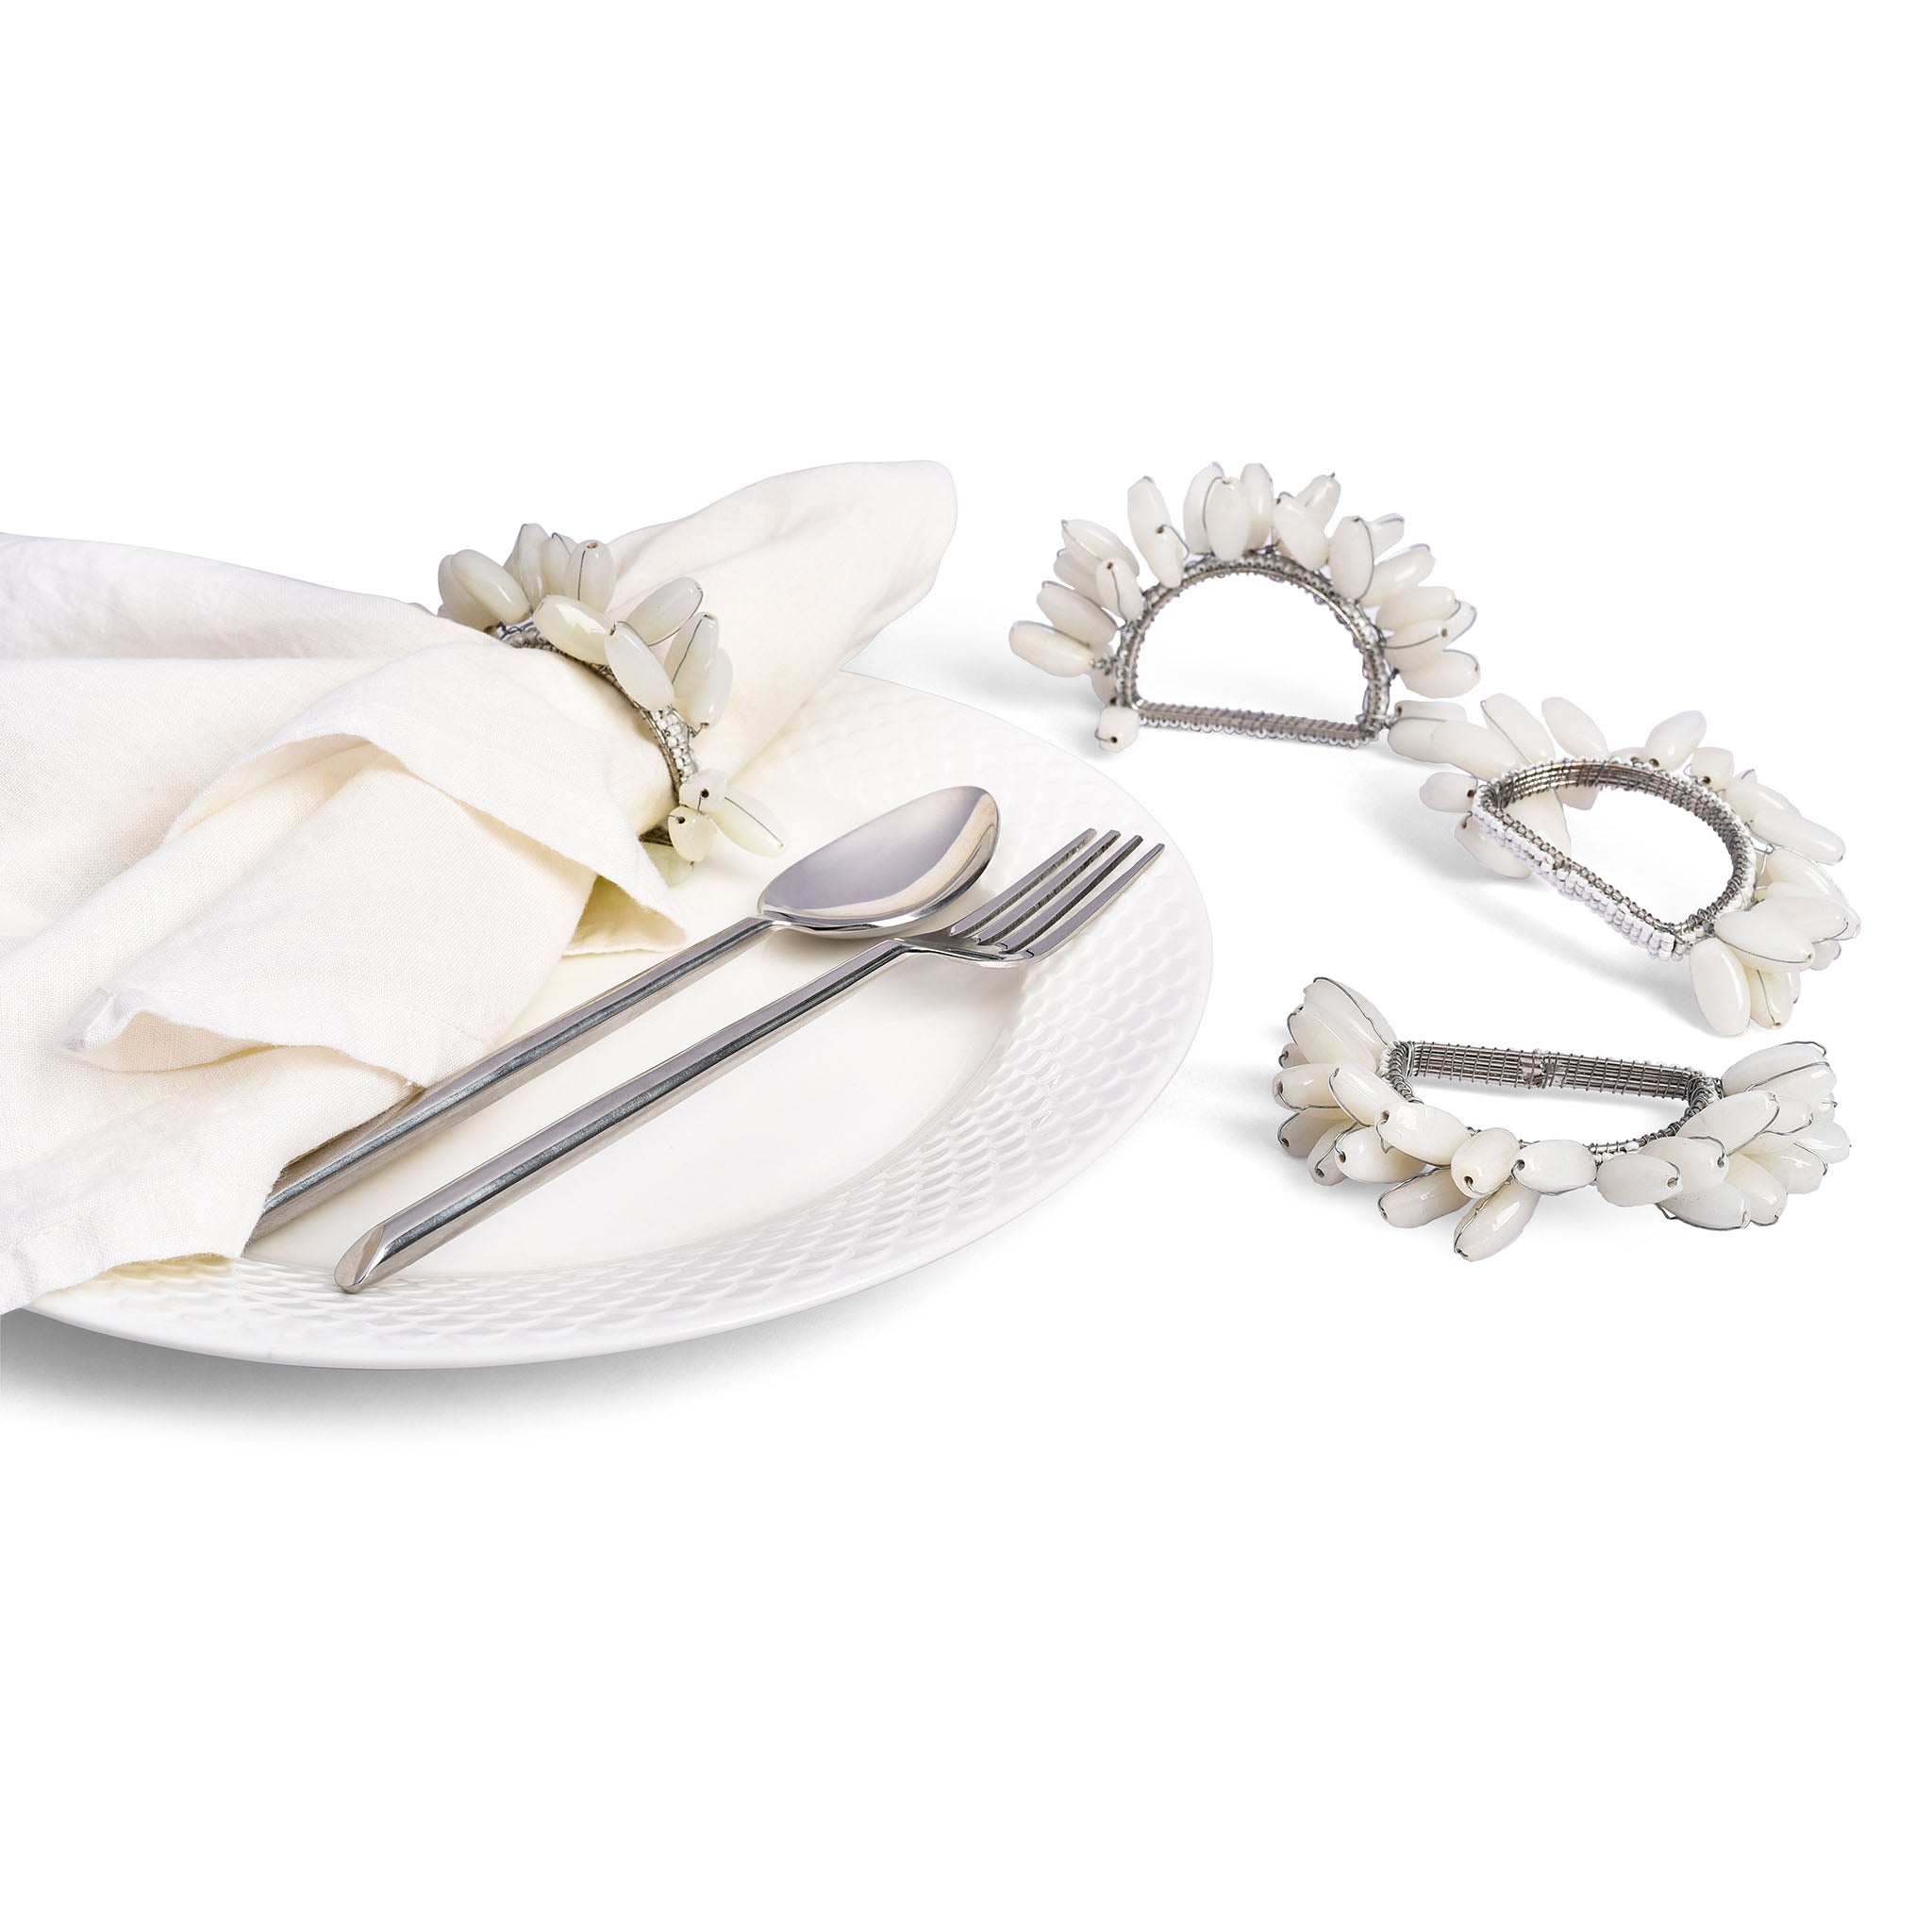 Fan-Out Napkin Ring in White, Set of 4